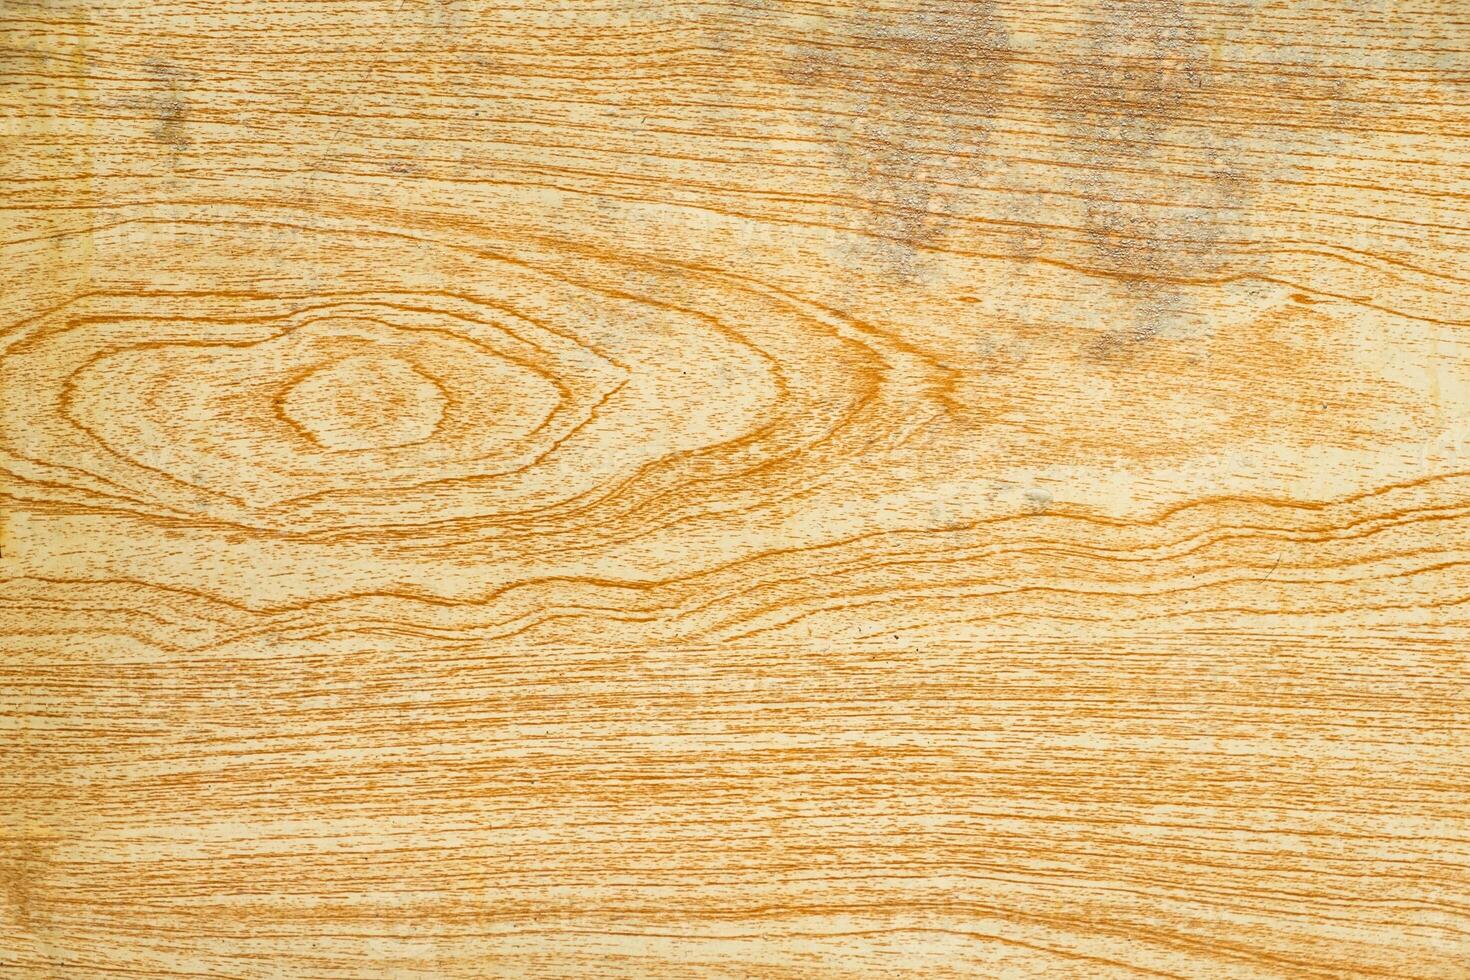 Wood striped yellow texture background photo